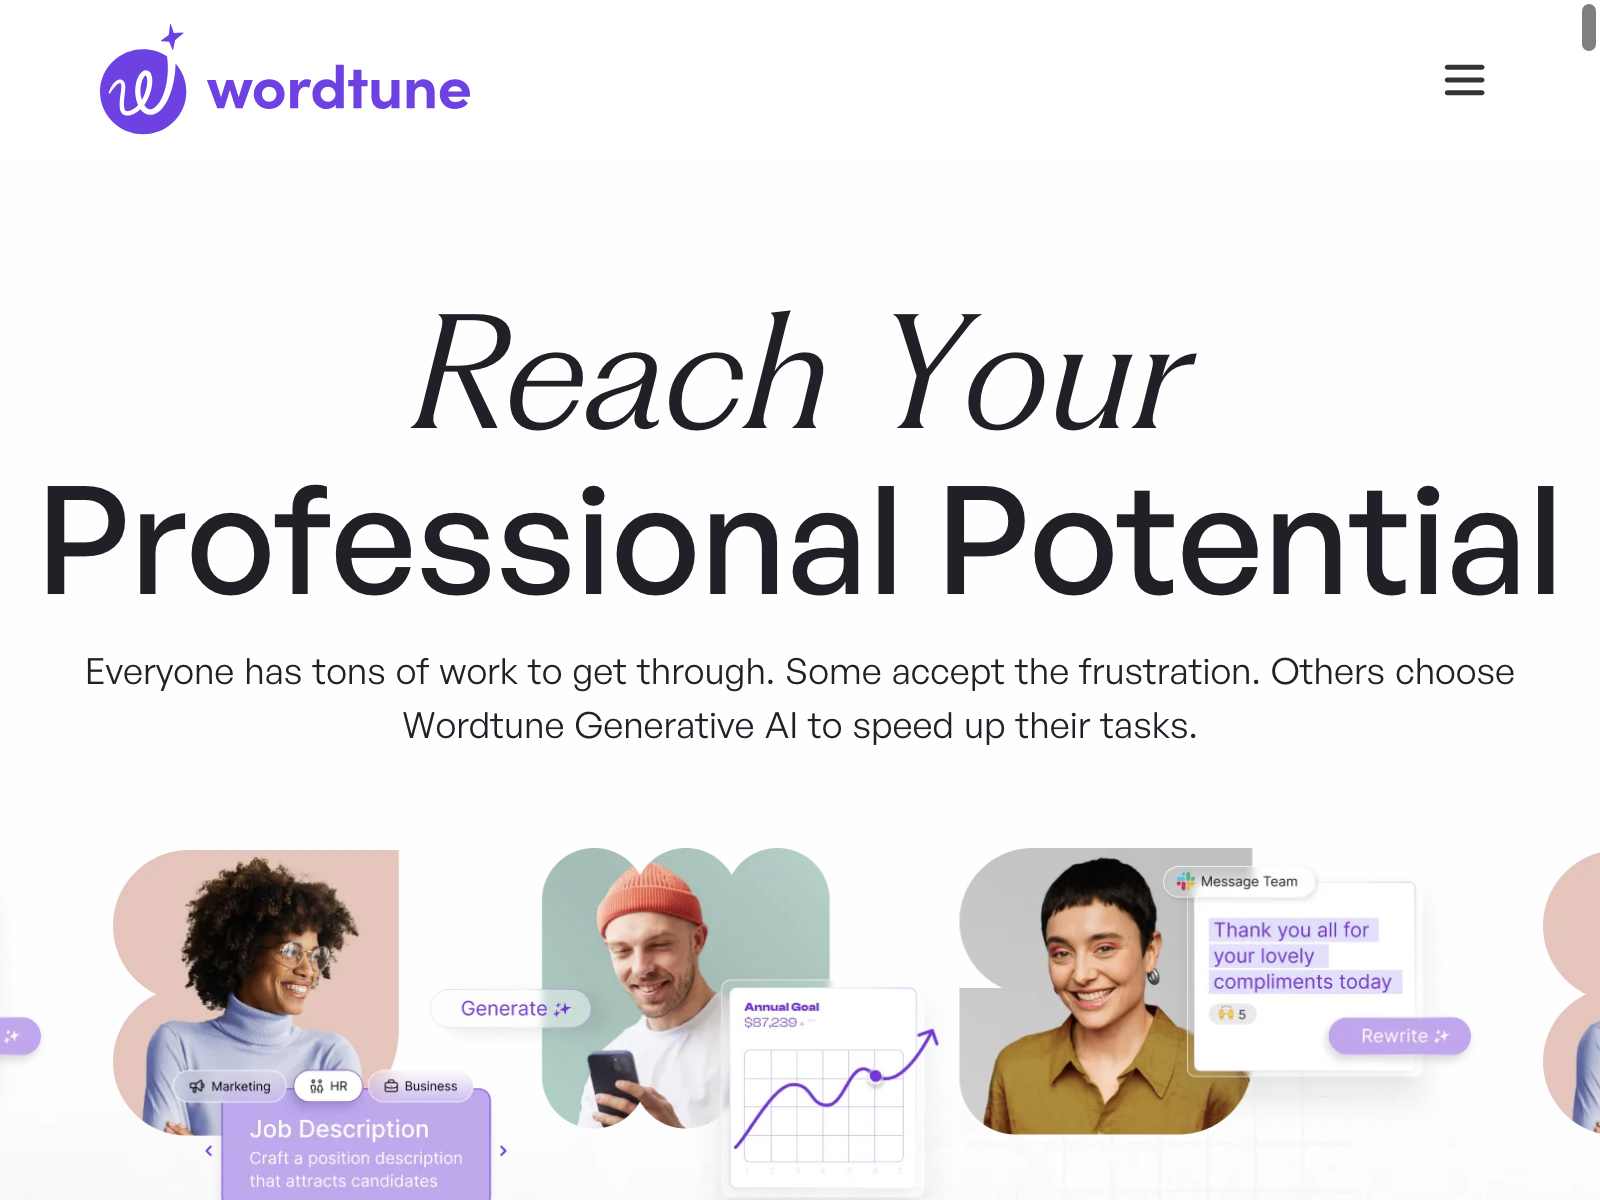 wordtune Review: Pros, Cons, Alternatives